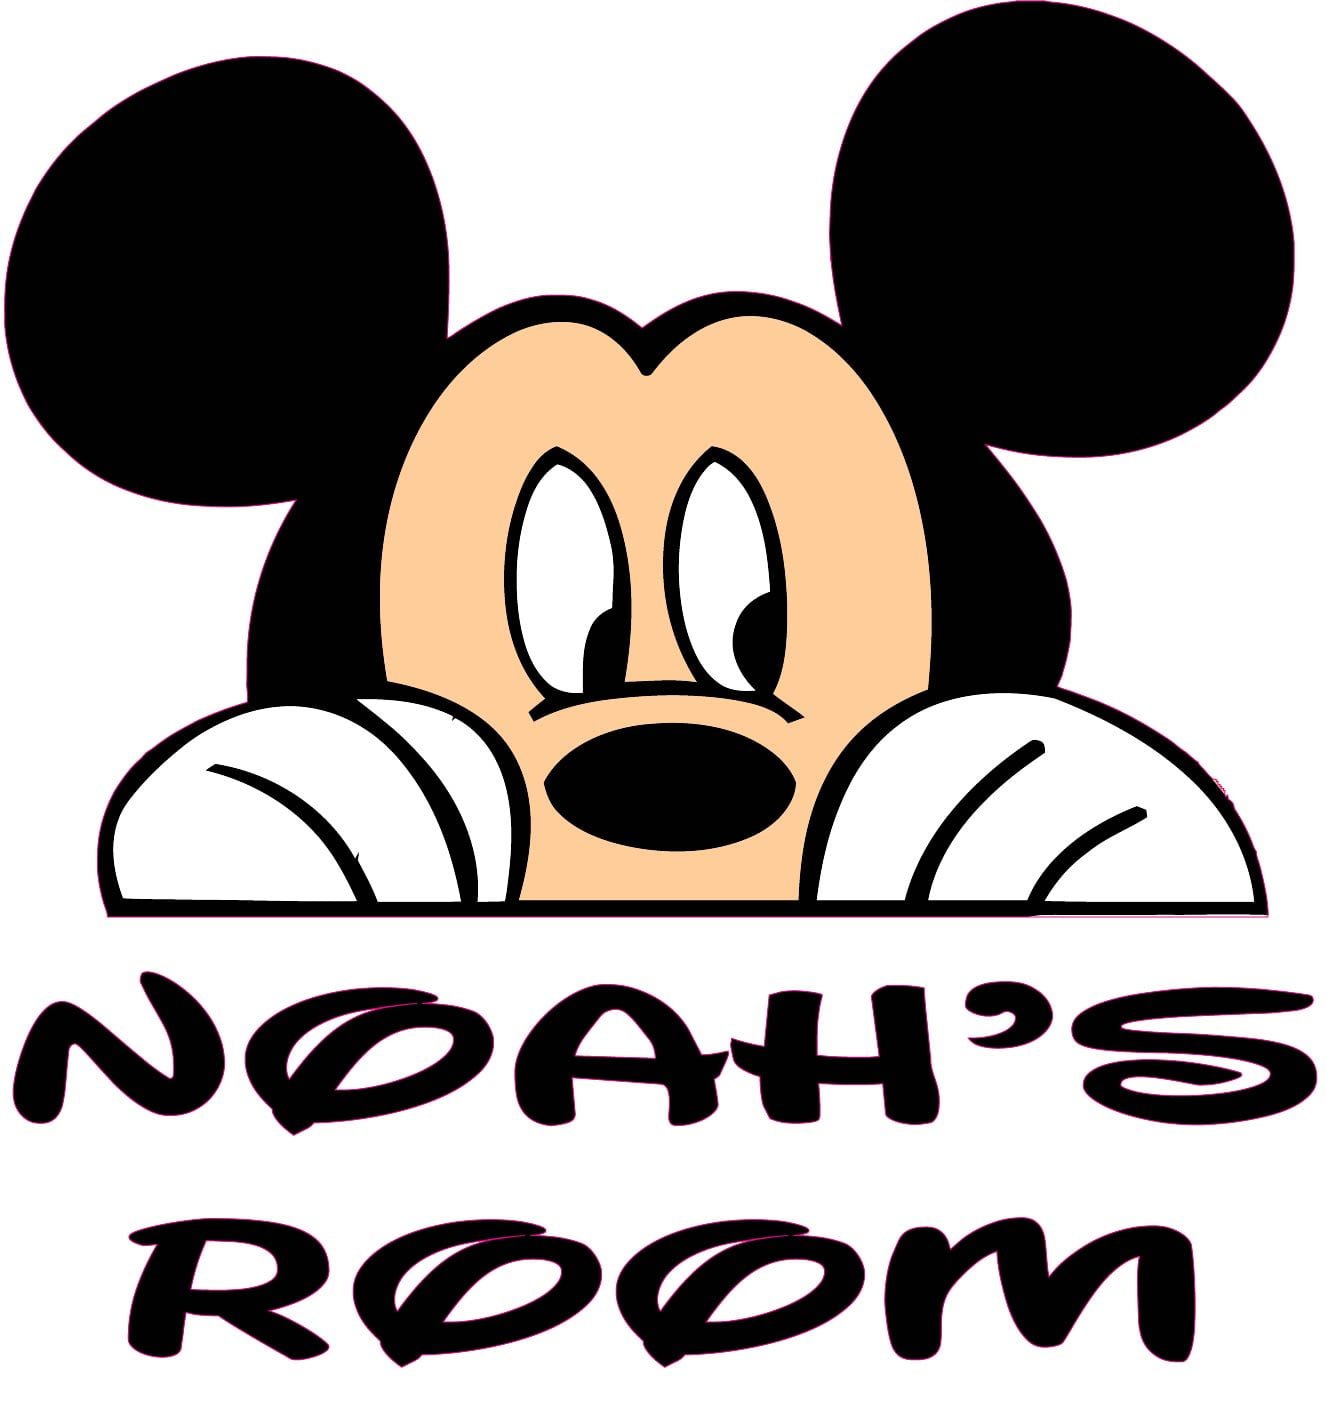 Mickey Mouse Stars Personalised Custom Name Wall Sticker Decal Boy Girl Kid Art 